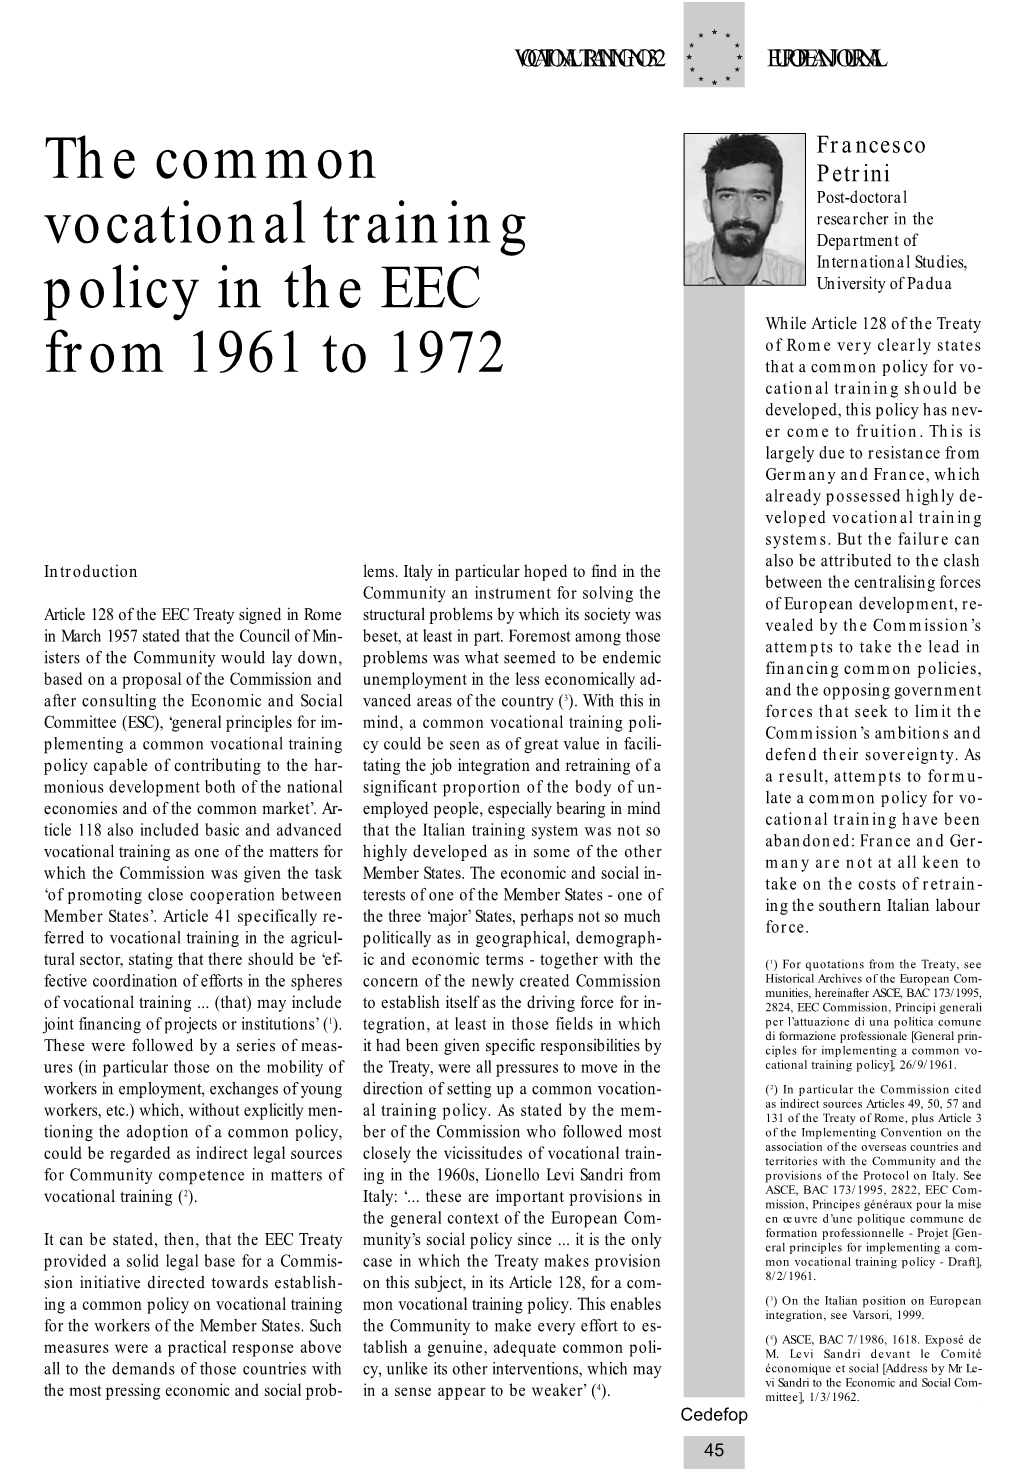 The Common Vocational Training Policy in the EEC from 1961 to 1972